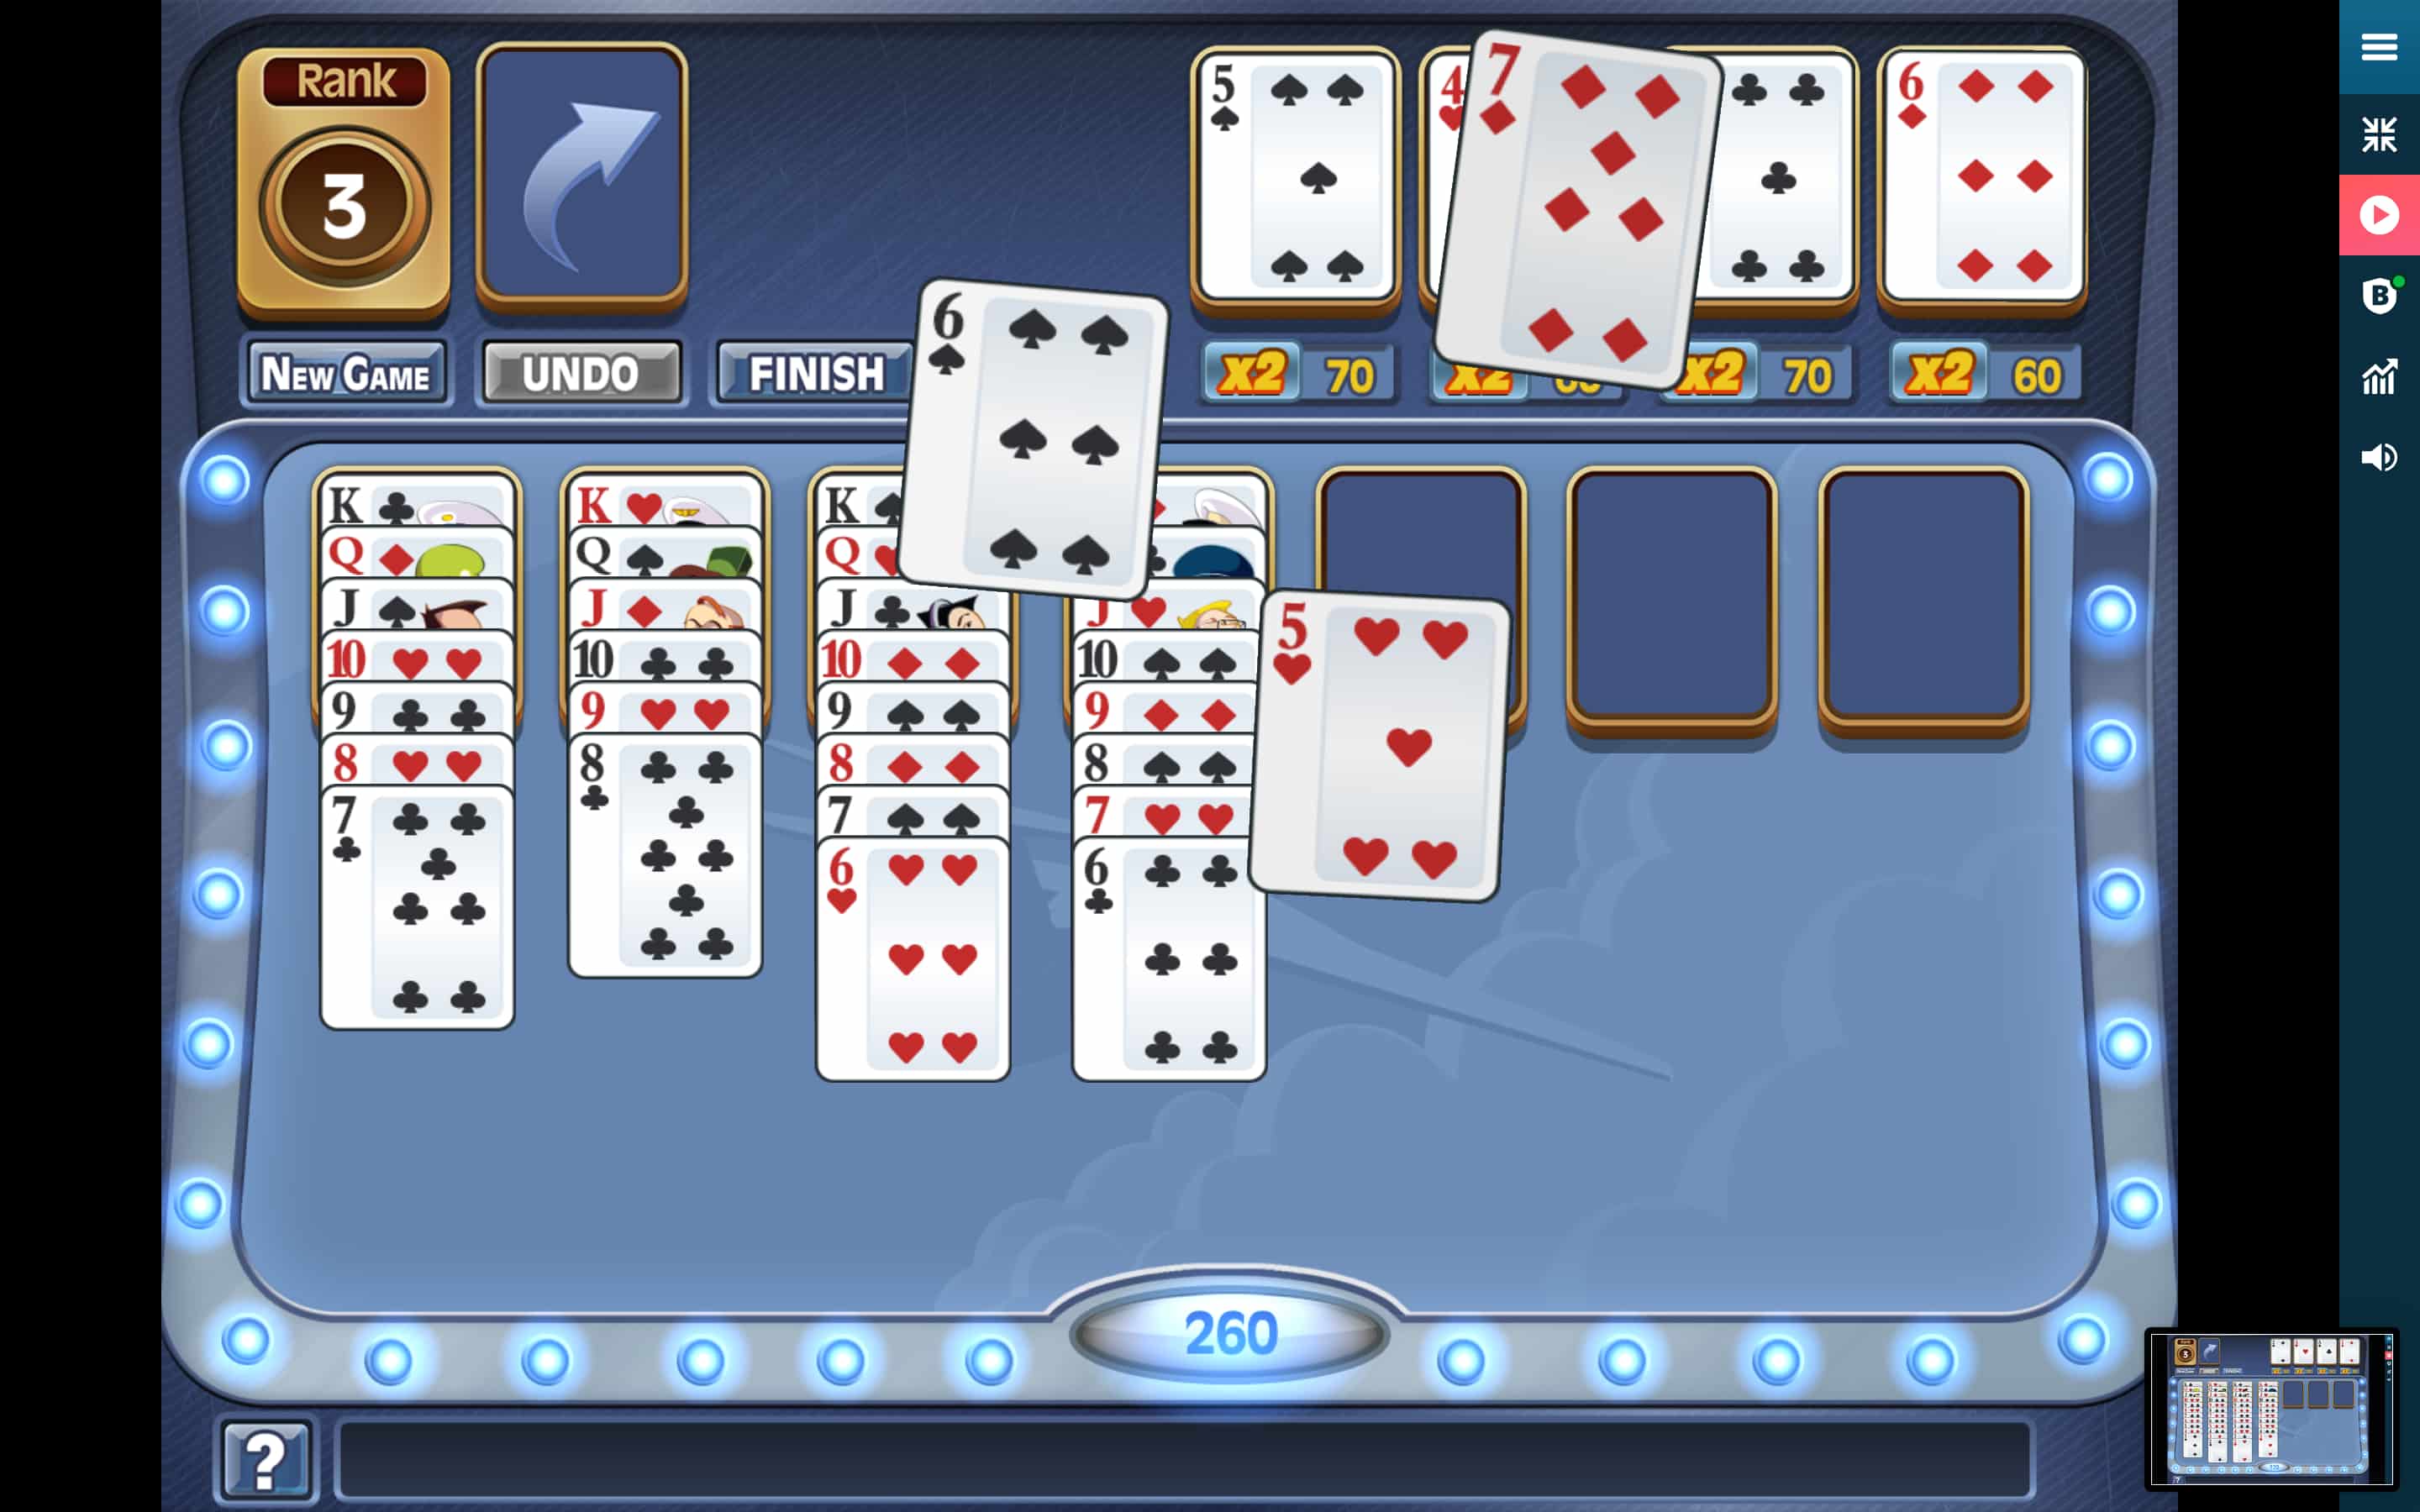 free online games solitaire classic